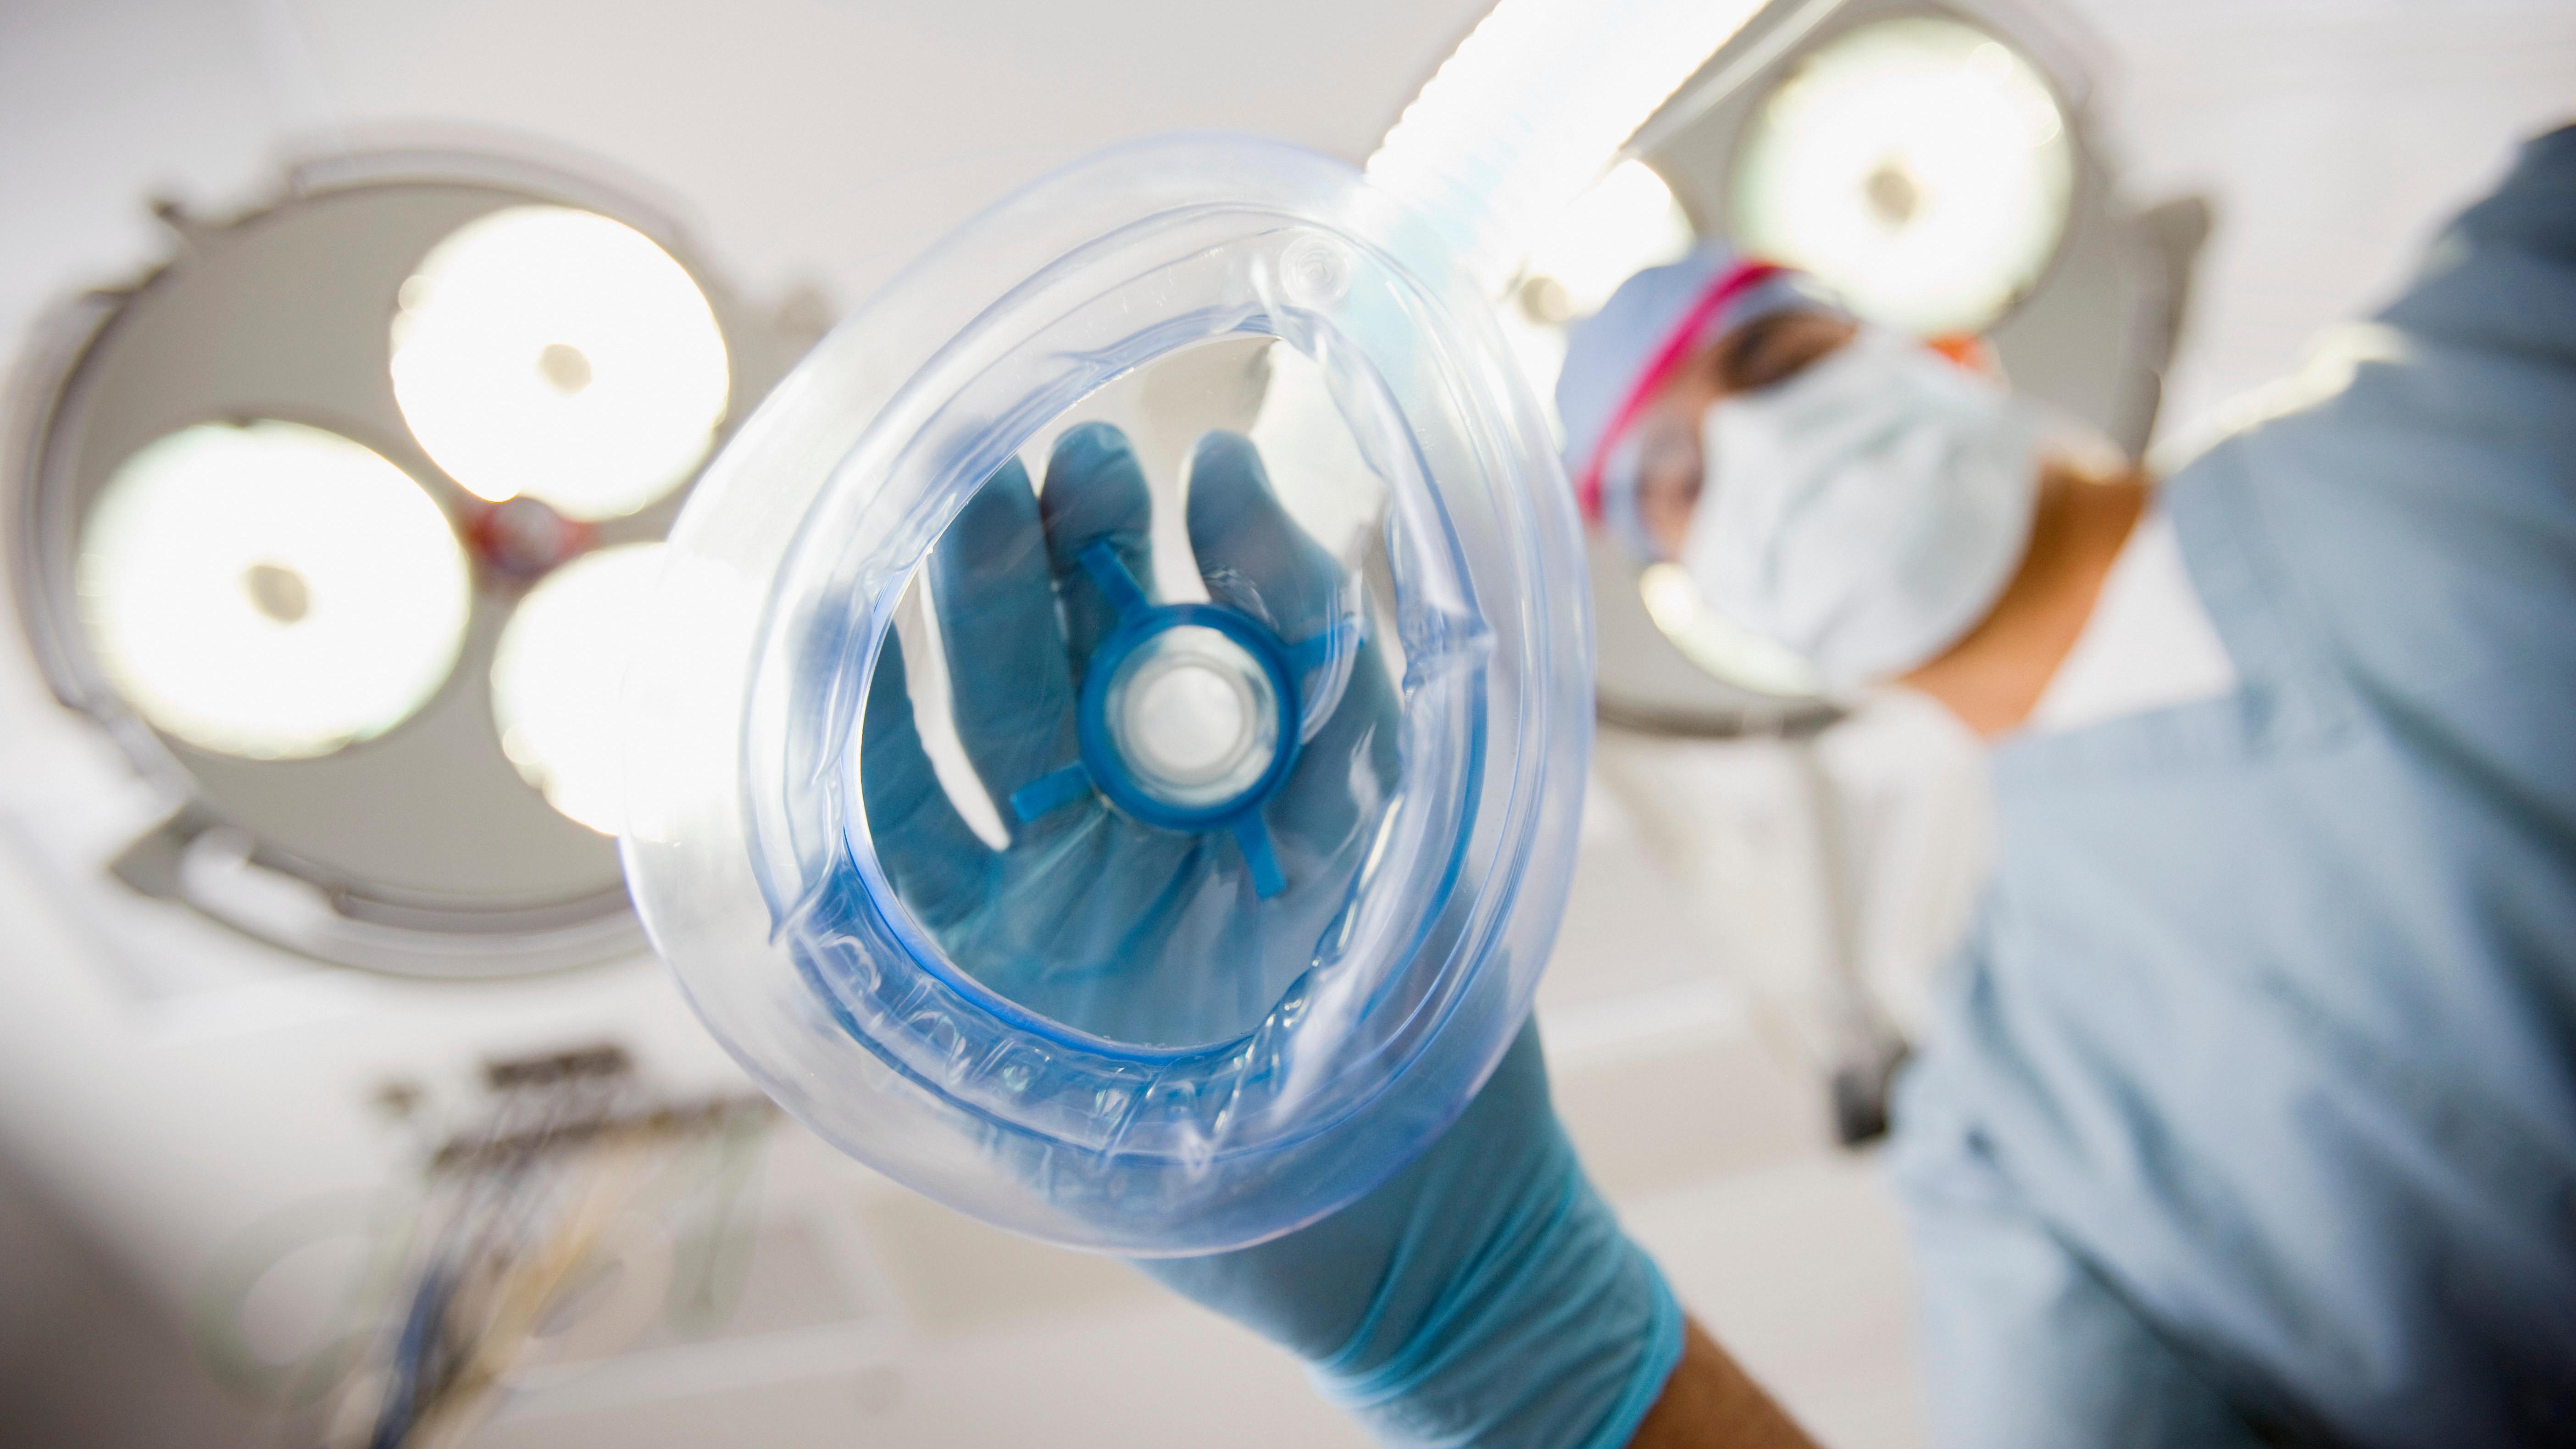 Anaesthetic Billing Services – Top Criteria For Choosing The Right Service Provider